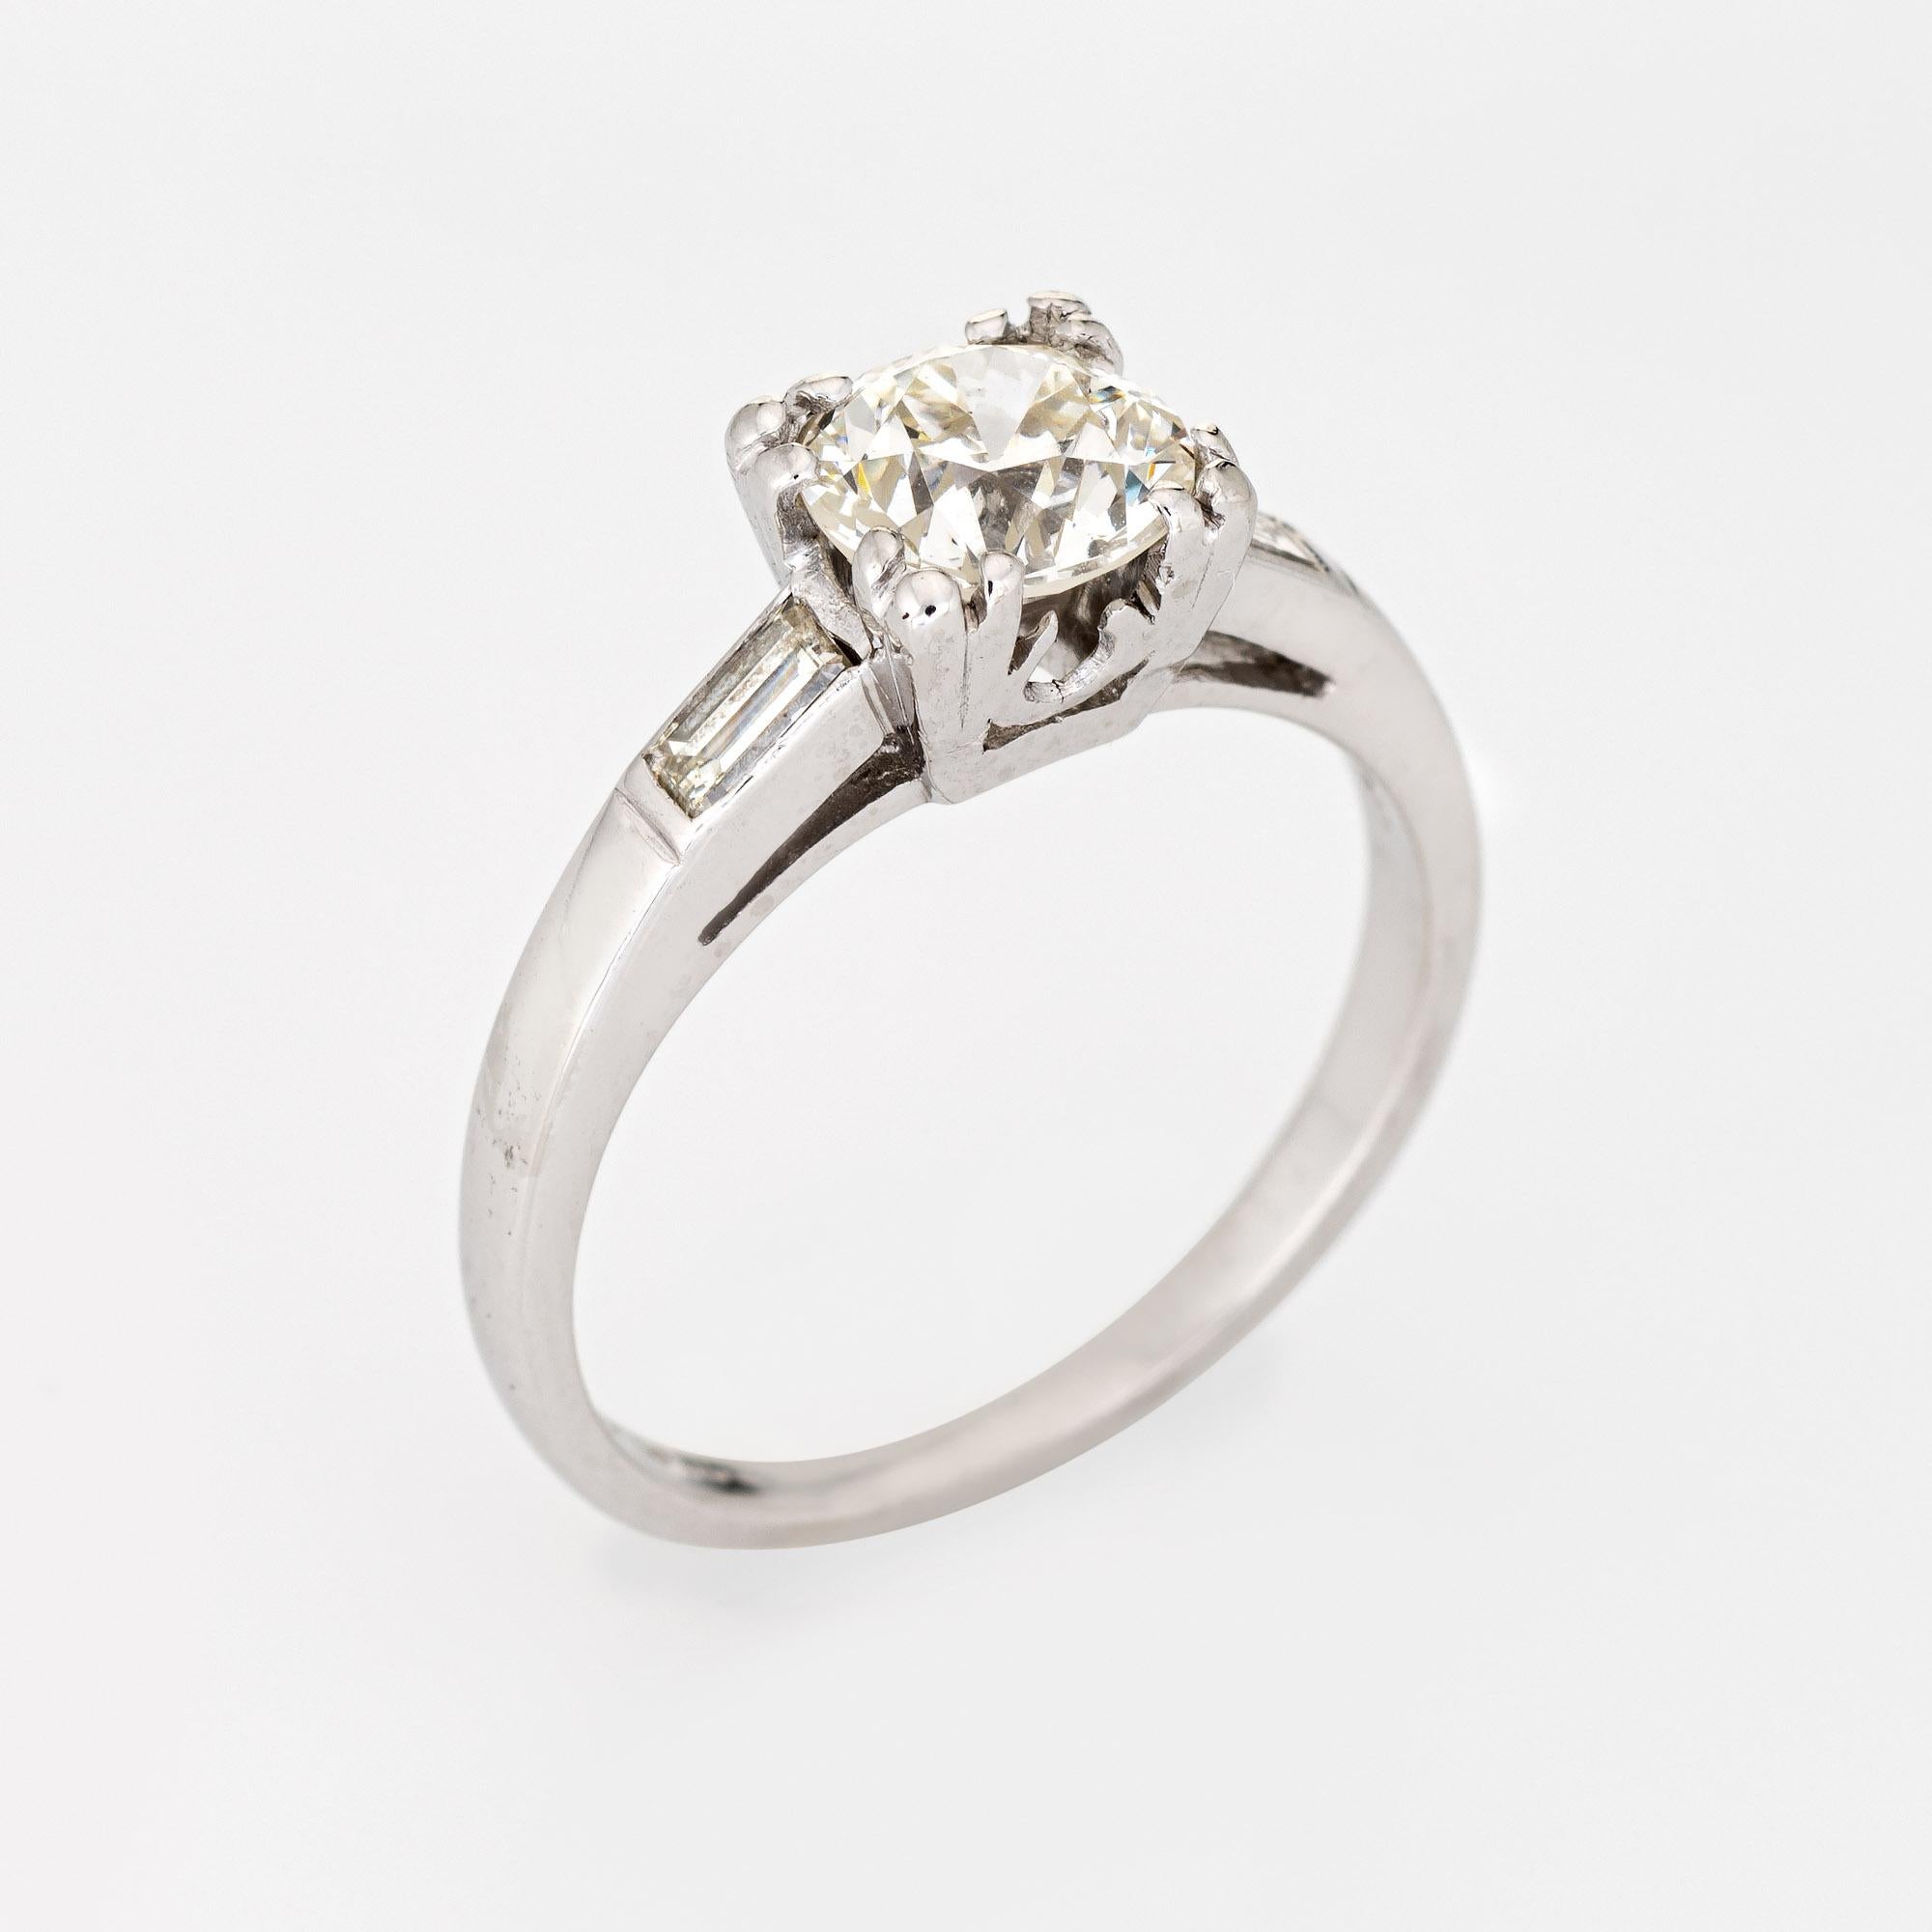 Elegant & finely detailed Art Deco era engagement ring (circa 1920s to 1930s) crafted in platinum. 

Centrally mounted estimated 1 carat old European cut diamond is accented with two estimated 0.04 carat rectangular cut diamonds. The total diamond